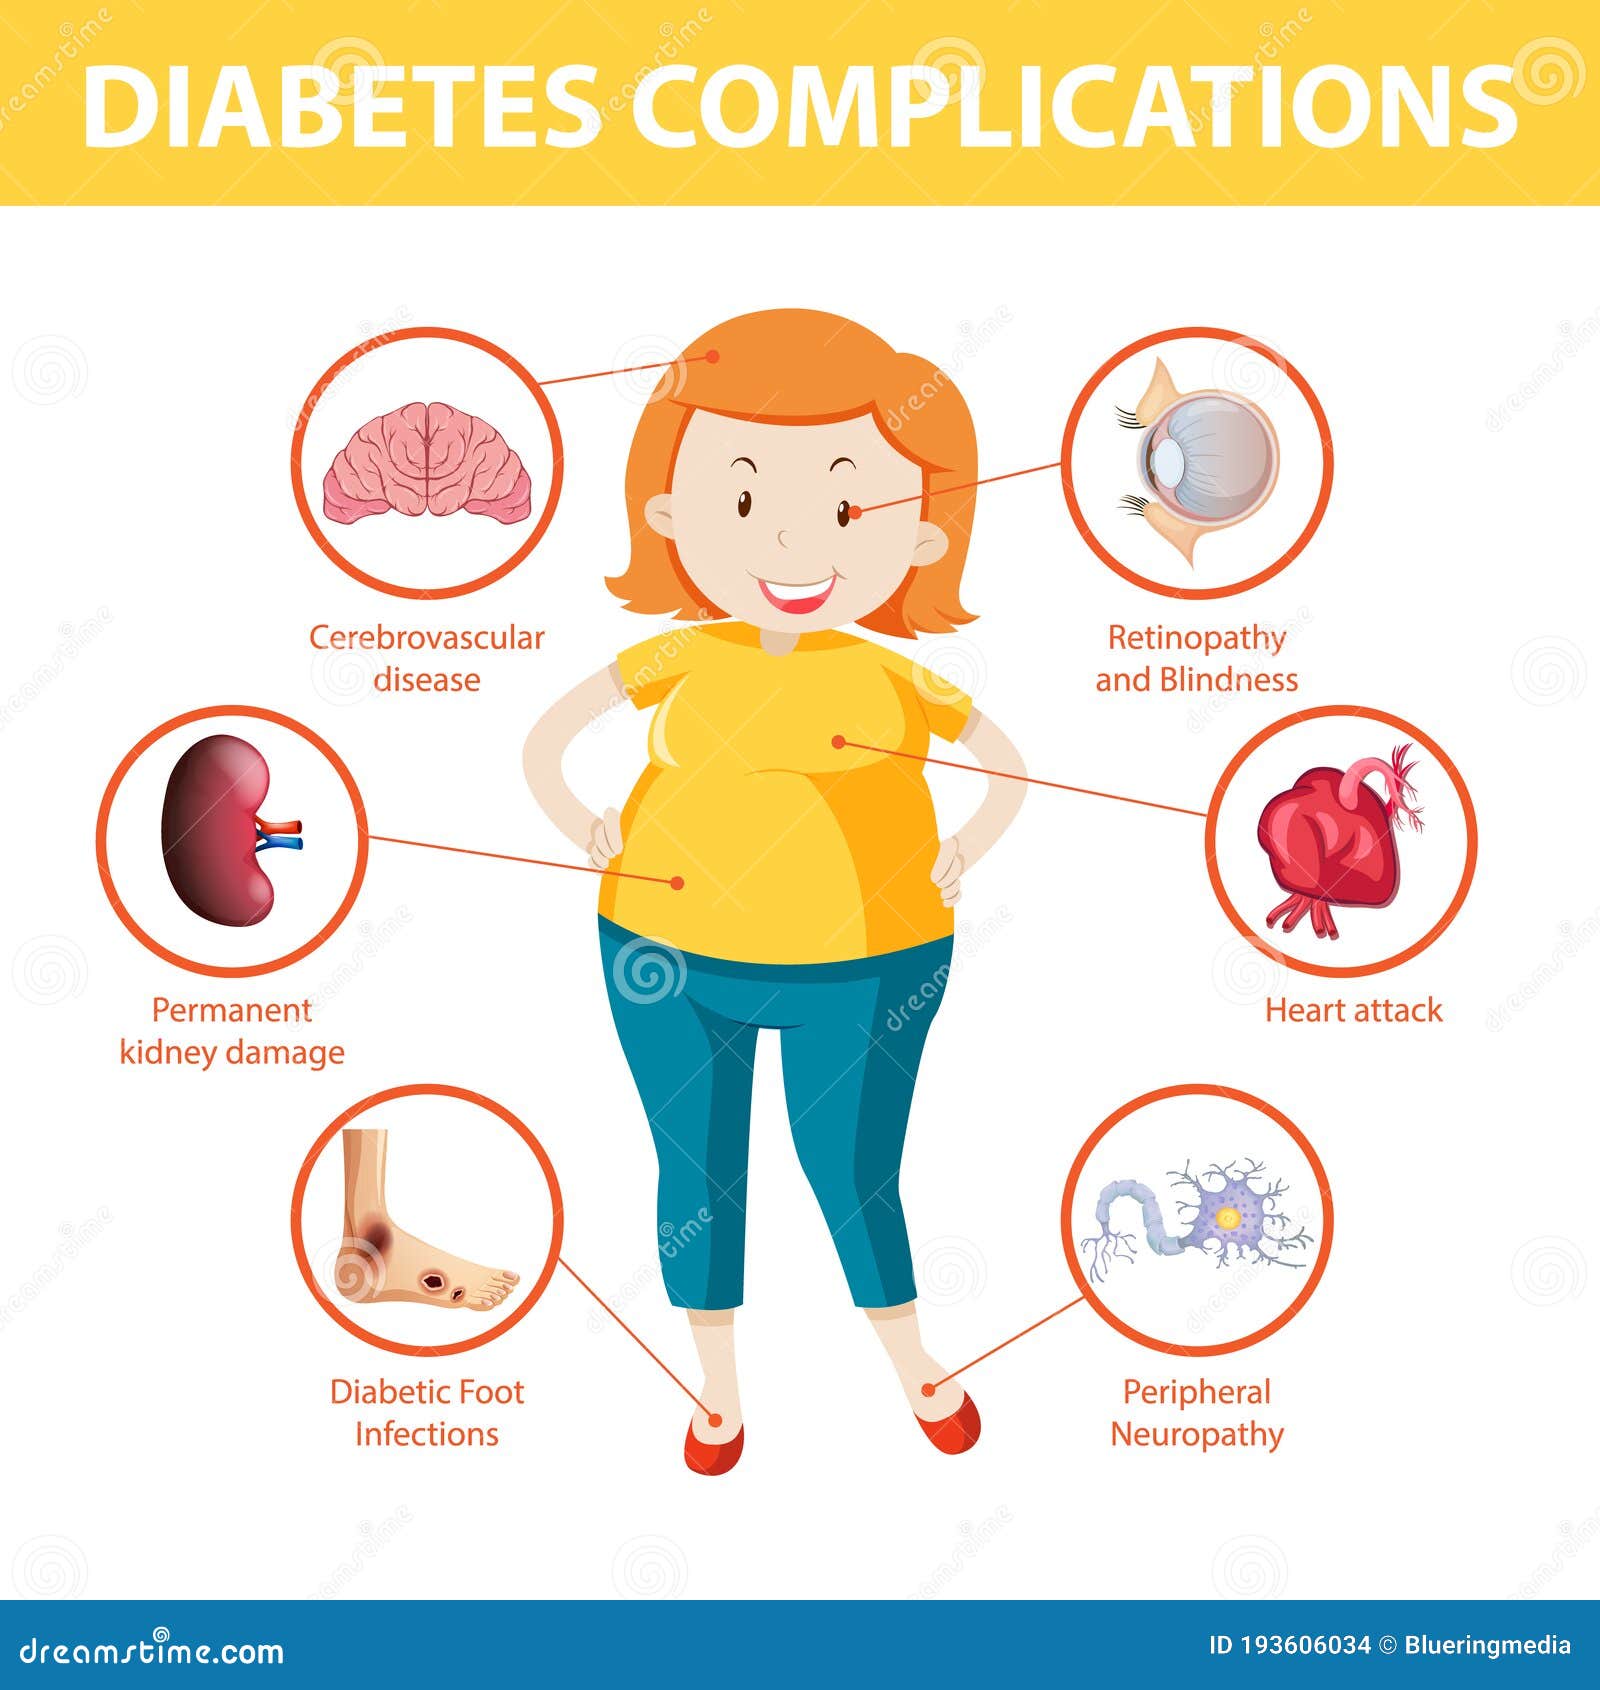 Diabetes Complications Information Infographic Stock Vector